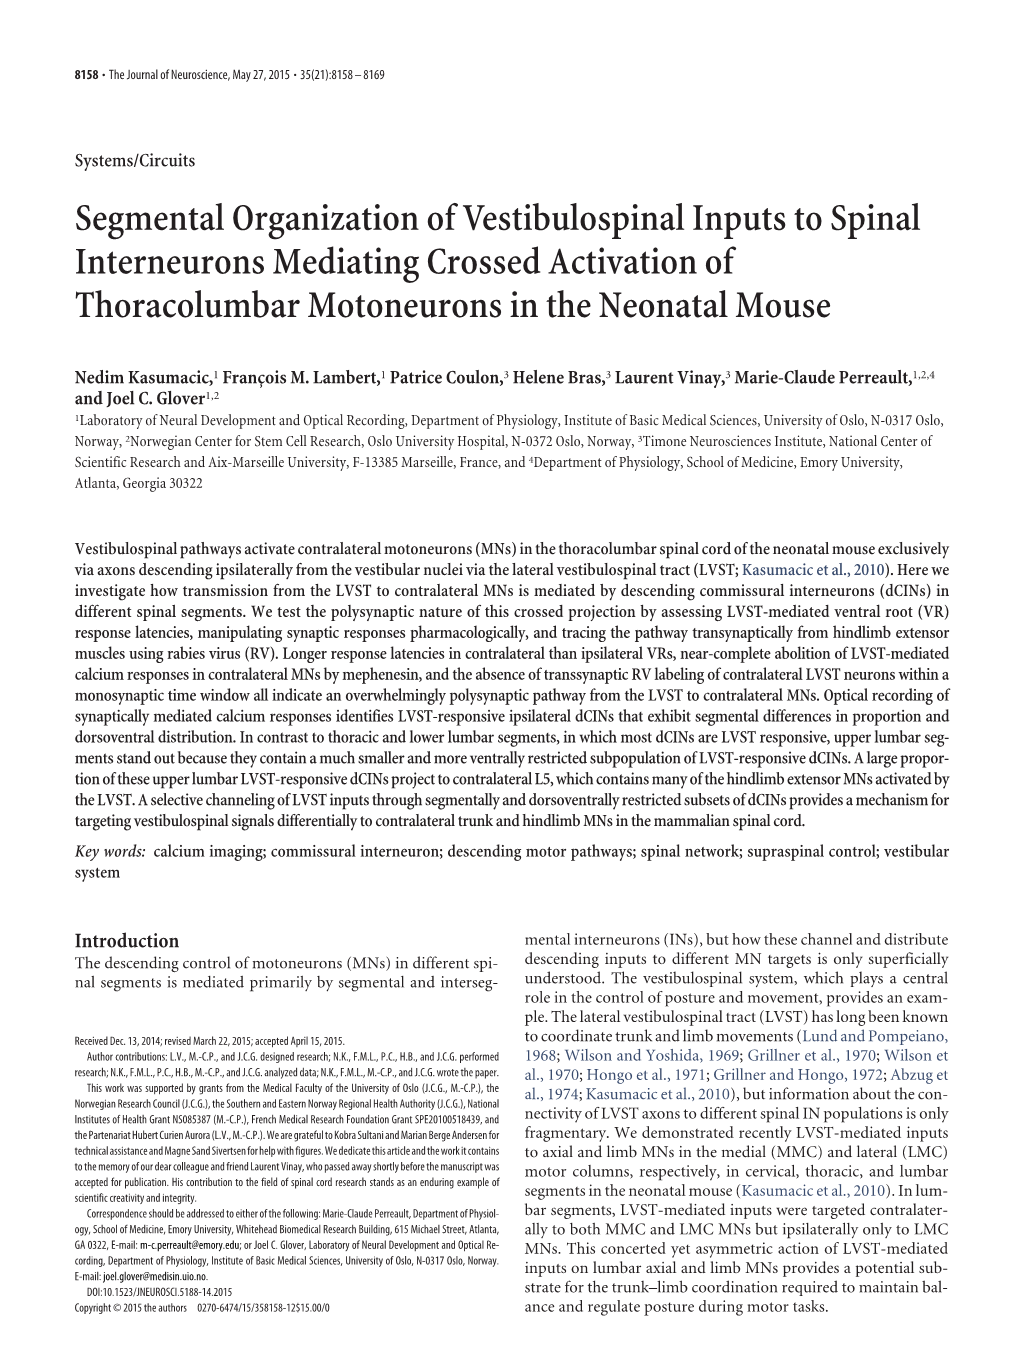 Segmental Organization of Vestibulospinal Inputs to Spinal Interneurons Mediating Crossed Activation of Thoracolumbar Motoneurons in the Neonatal Mouse